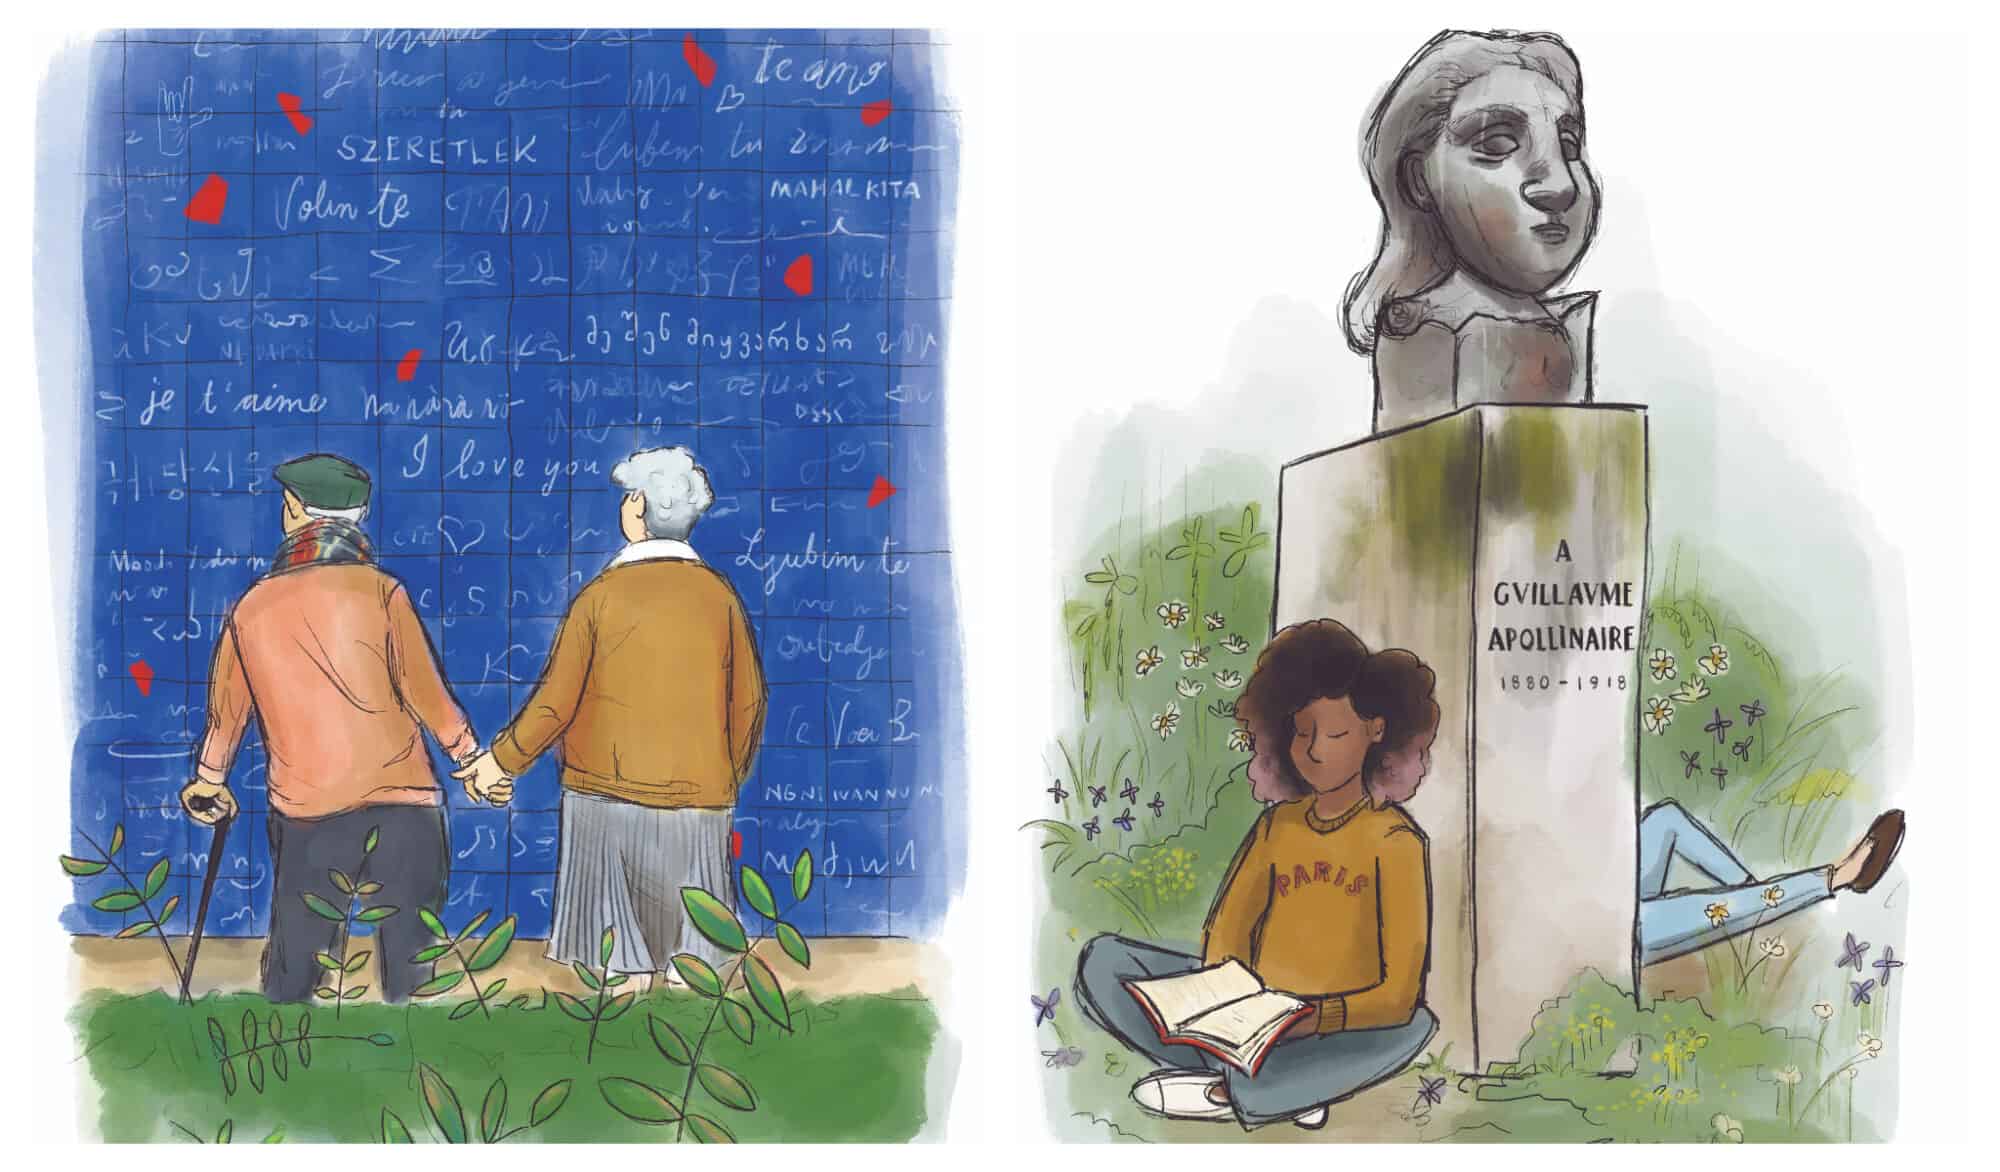 Left: A couple holds hands as they look at a blue tiled wall full of i love yous in different languages. Right: A woman wearing a yellow sweater sits and reads a book as she leans on a monument.